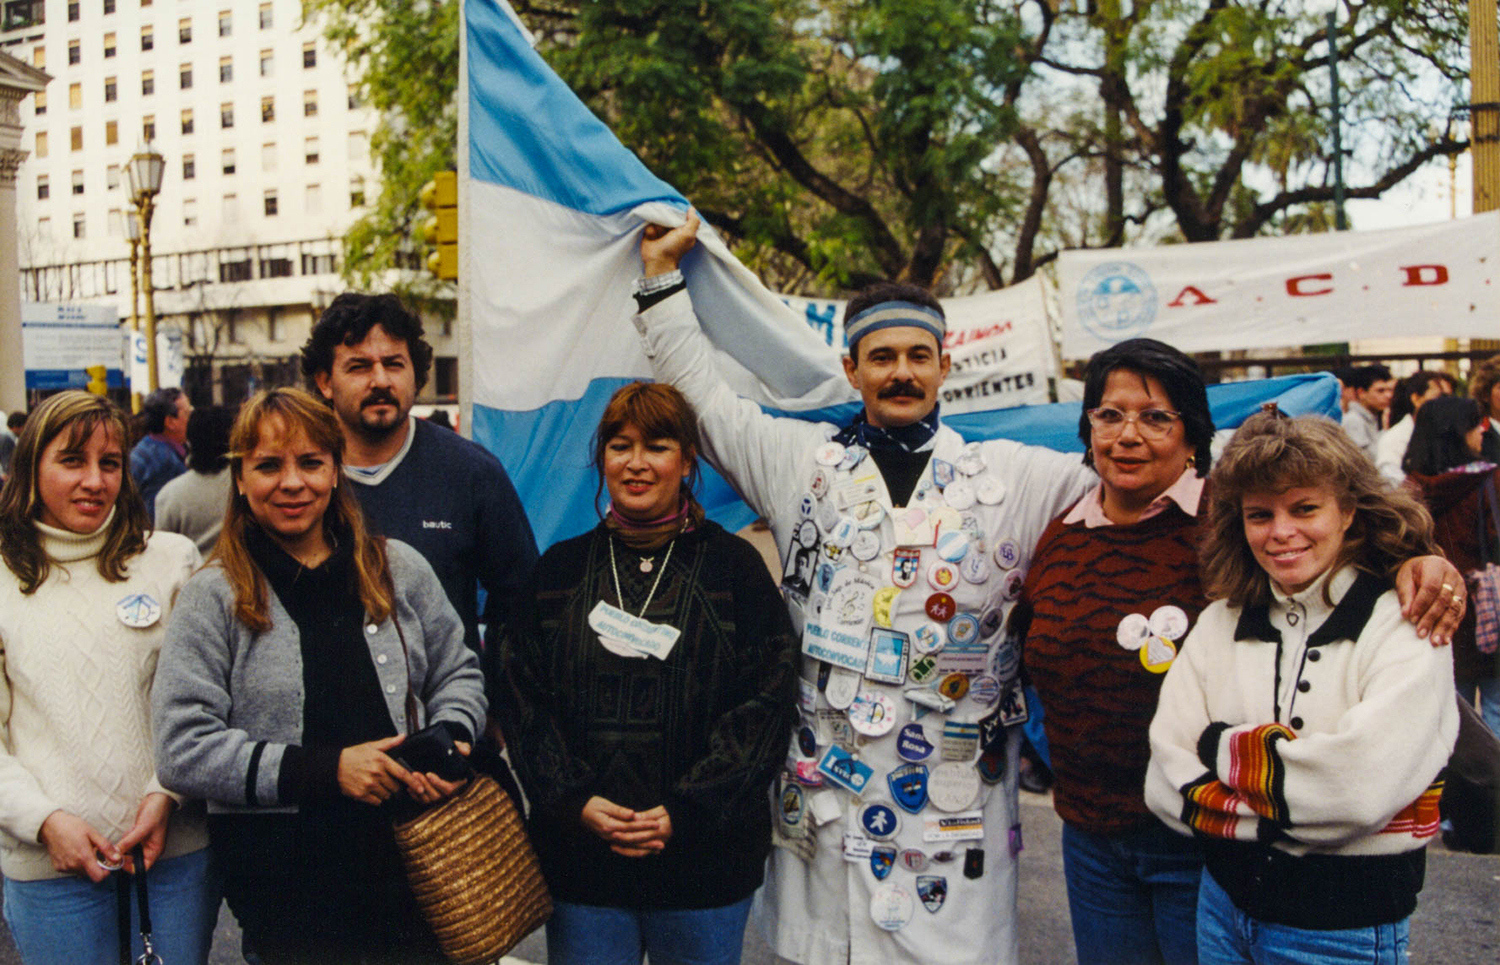 <p><em>Autoconvocados</em> (self-organised protestors) from Corrientes province, in Buenos Aires' Plaza de Mayo. Argentina has a rich tradition of autonomous worker movements who eschew formal affiliations with unions or political parties, yet can successfully mount sustained popular protests around shared concerns. <br /></p>
<p>In these protests in 1999, a diverse front of teachers, state employees, farmers, pensioners, healthcare workers, small business owners, transport workers, and the un(der)employed organised months-long demonstrations against government corruption, unpaid wages, and diminishing quality of life in their province. Using tactics such as strikes, roadblocks, <em>escraches</em> (loud demonstrations outside the homes of targeted individuals), and mass marches, they amplified their call for reforms. Six months in, the Corrientes <em>autoconvocados</em> had even brought their protests to the national capital. <br /></p>
<p>Their concerns and protests were an early indicator of the grim politico-economic meltdown that was about to ravage the entire country. </p>